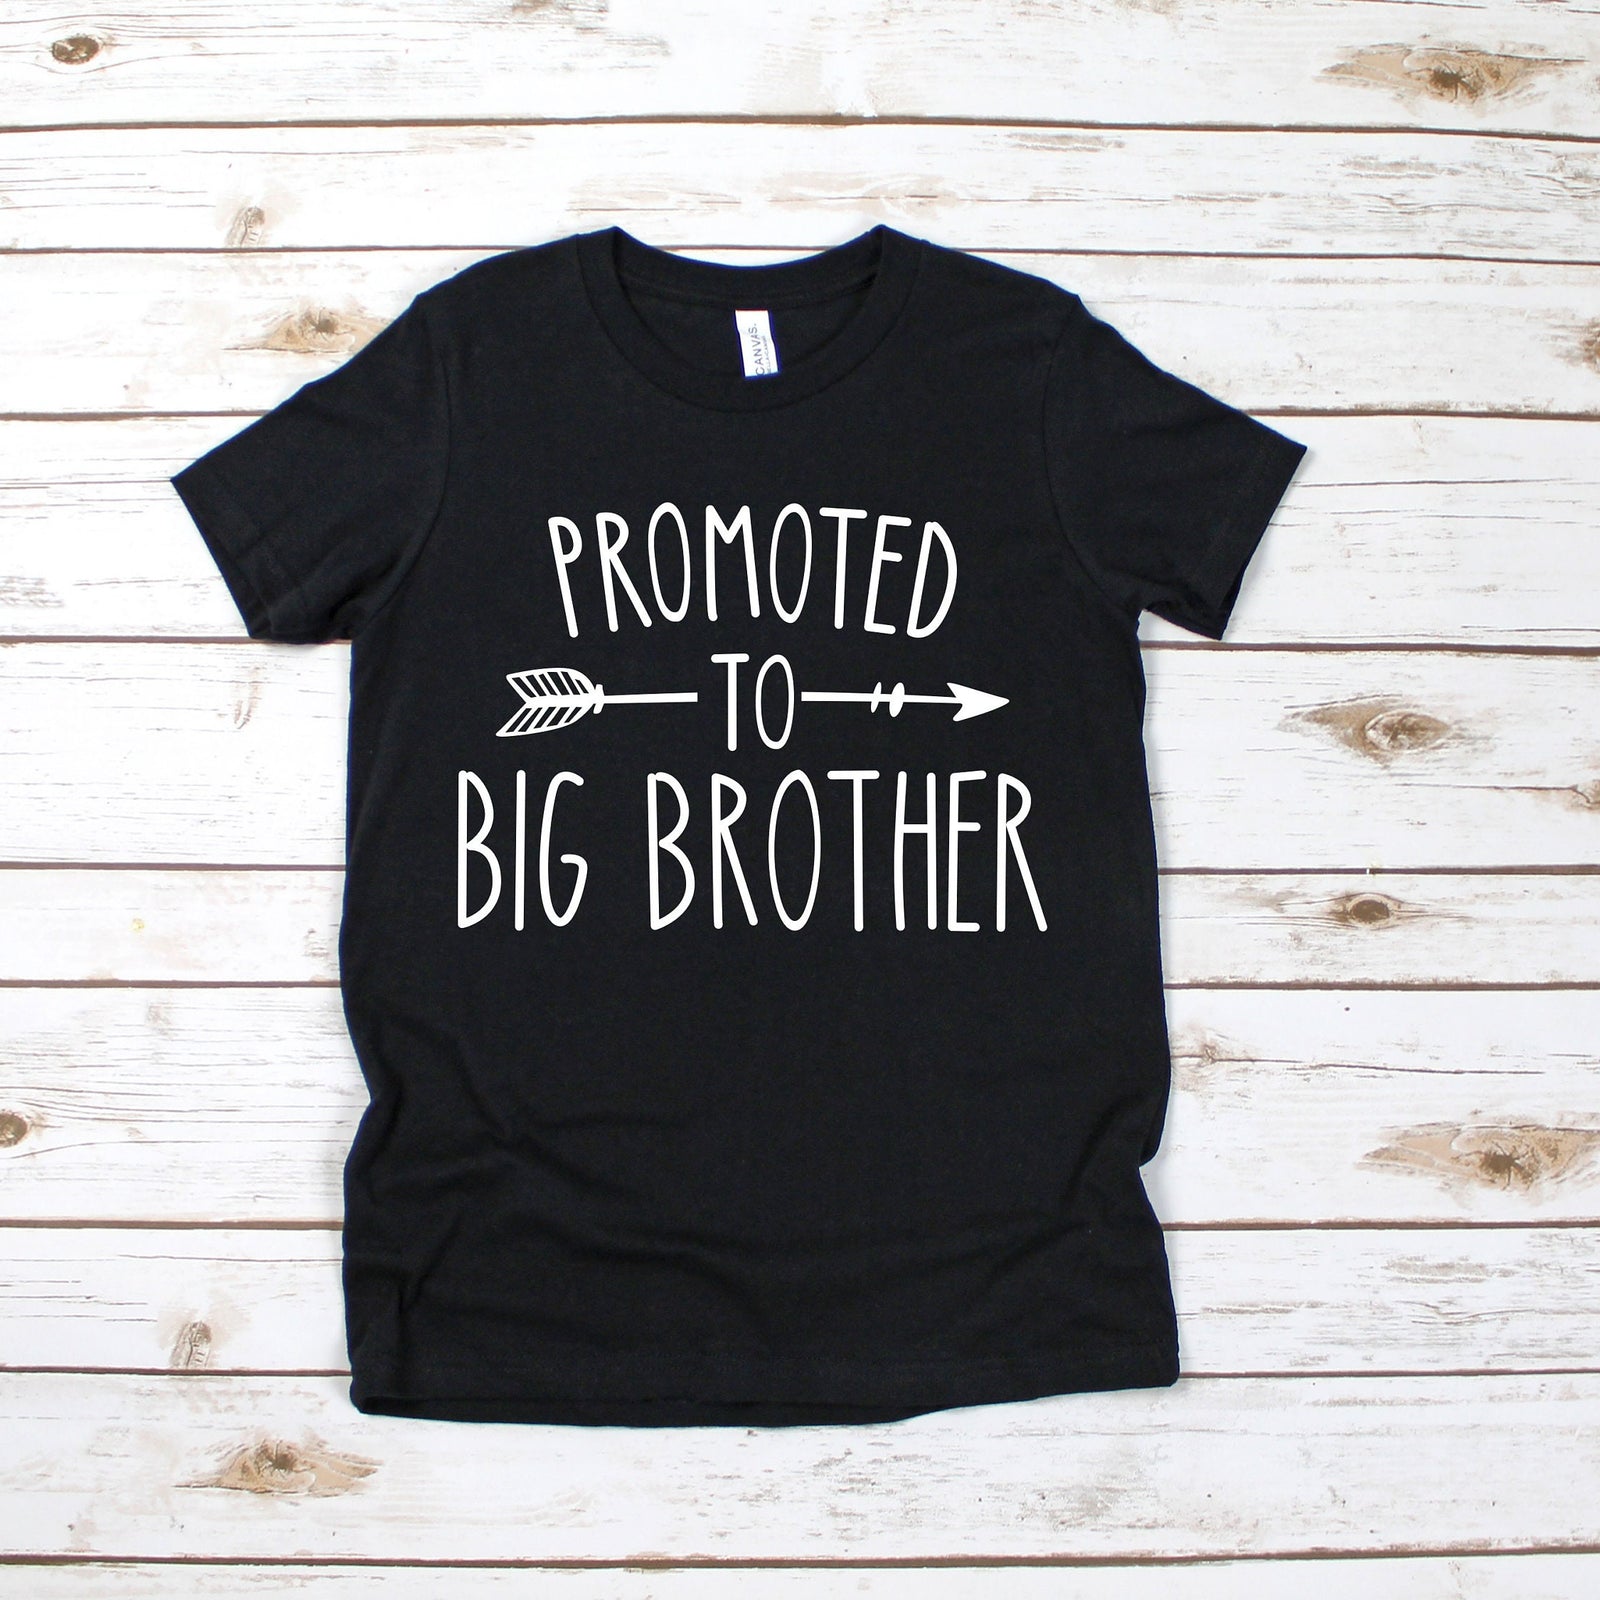 Promoted to Big Brother T Shirt - Cute Big Brother T Shirt - Baby Announcement Shirt - Family Announcement Baby Reveal Shirt